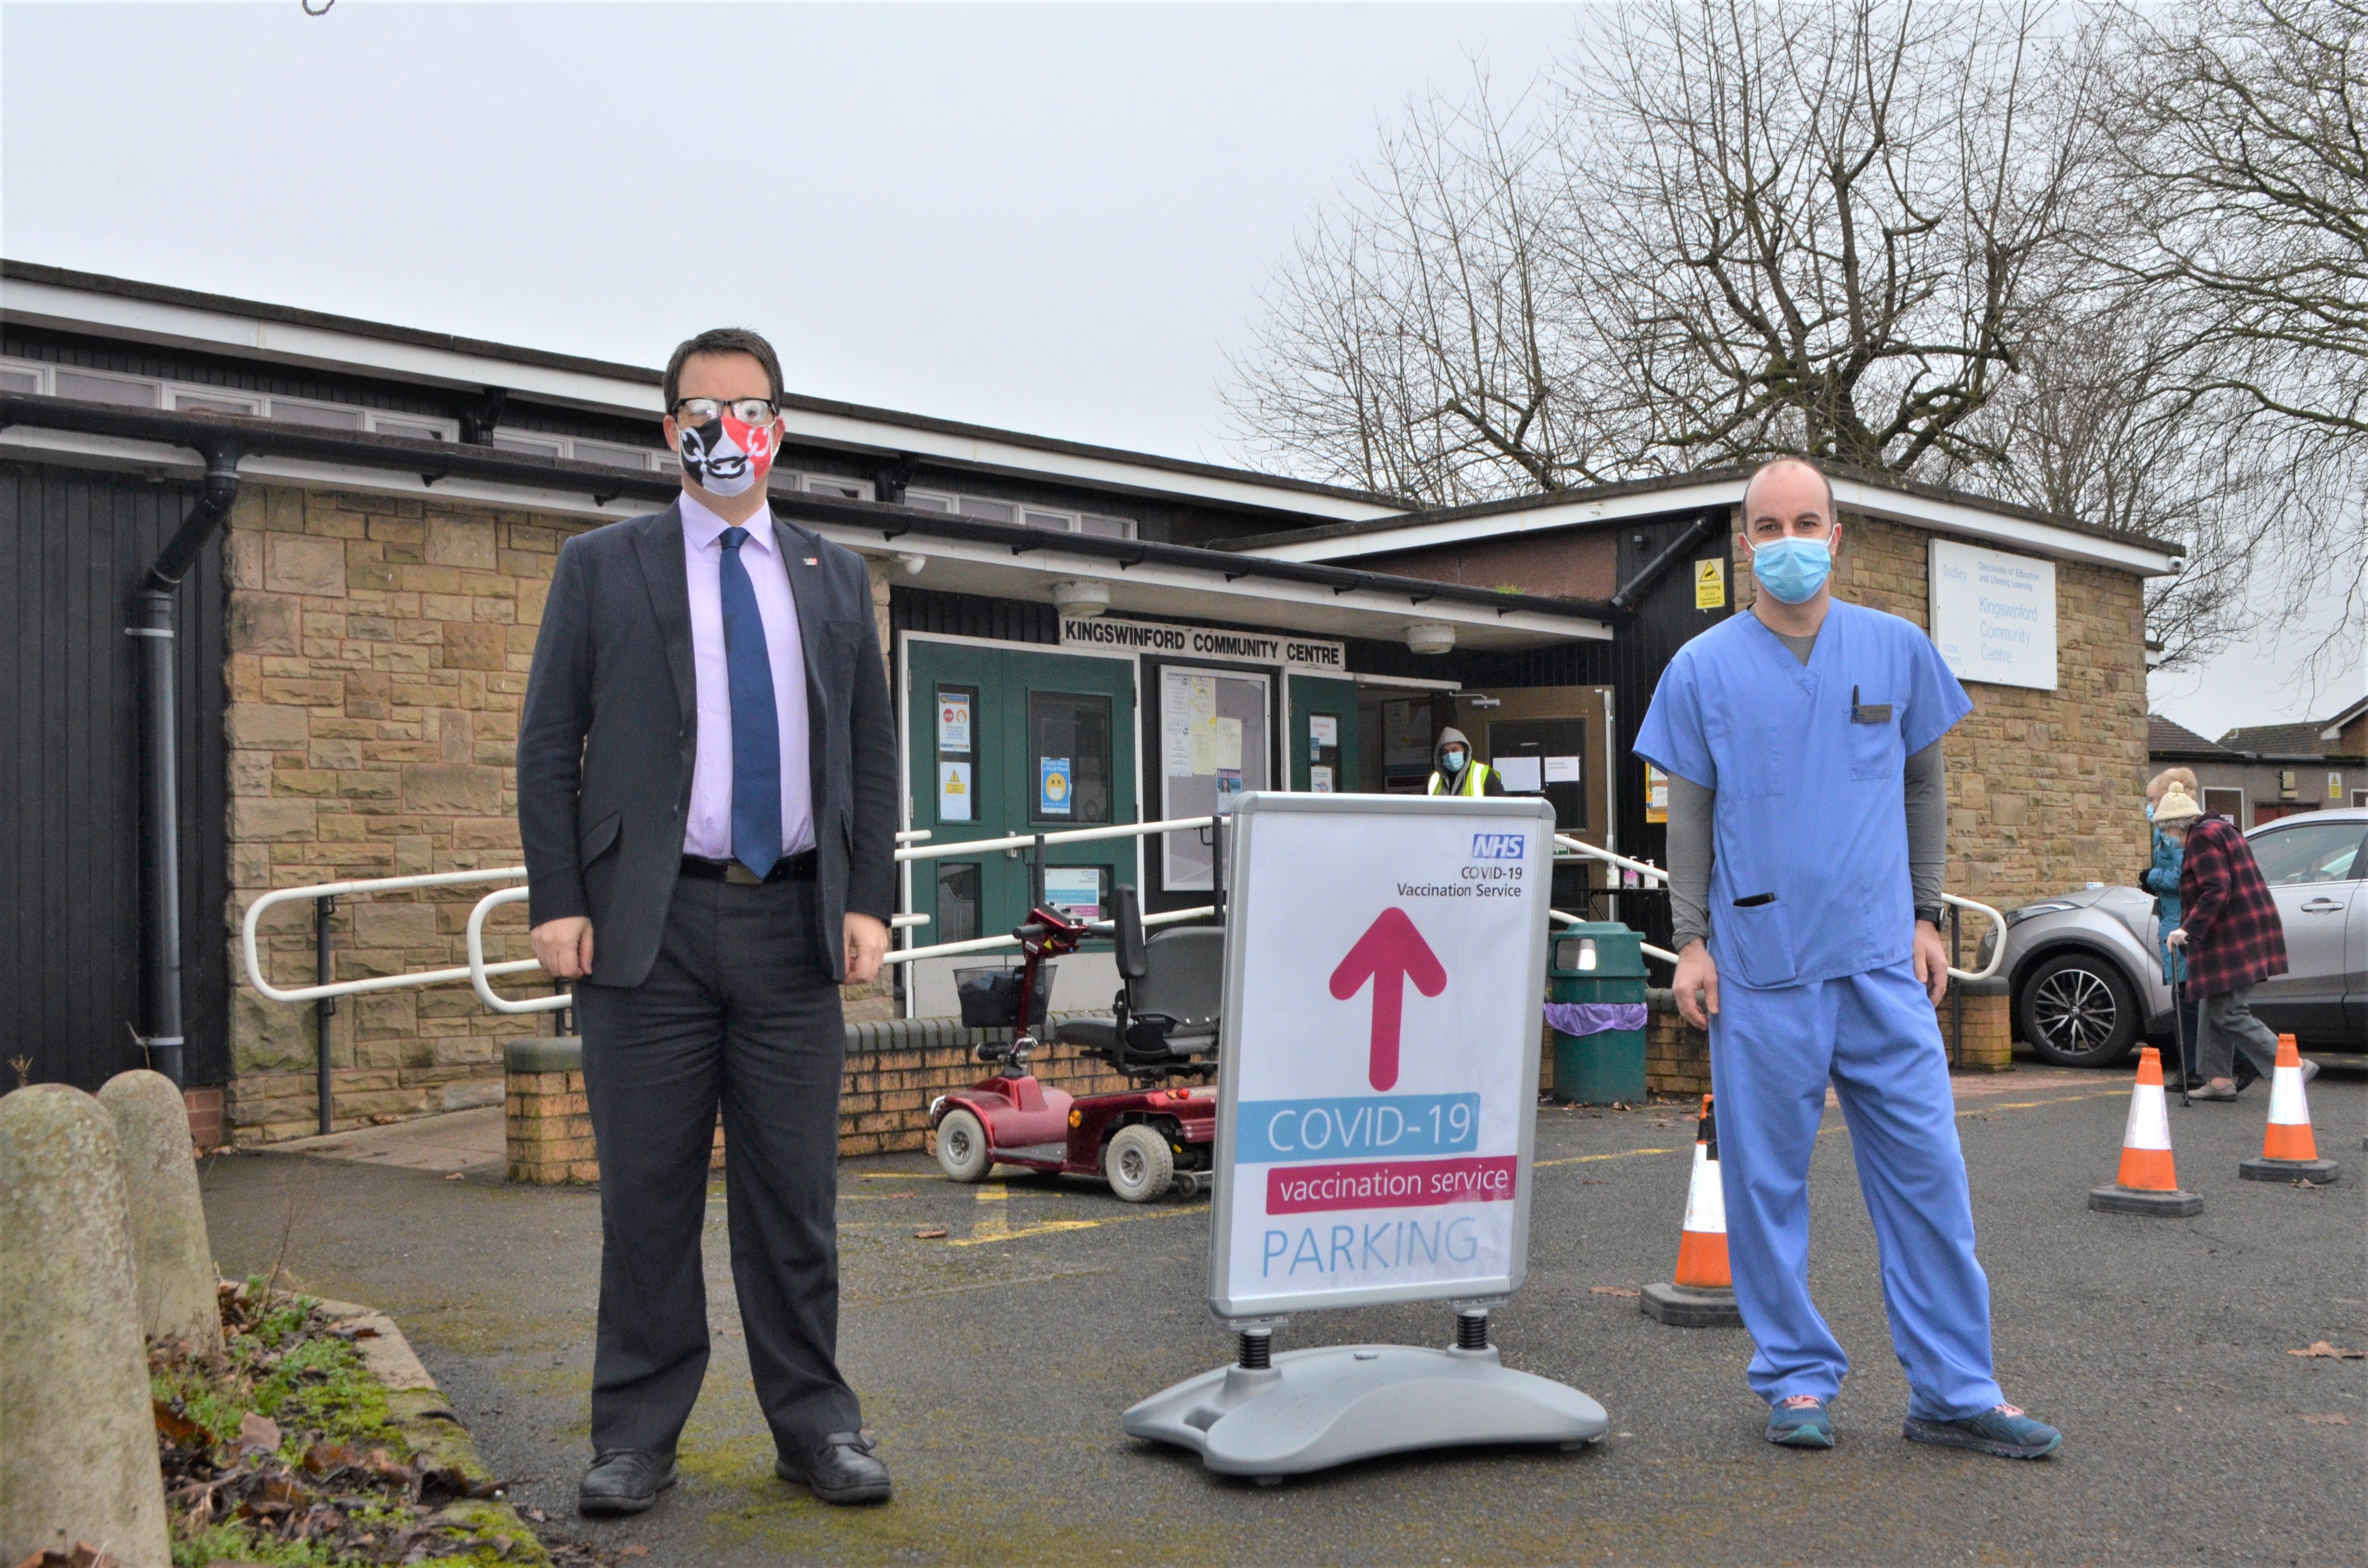 Mike with Dr Simon Hughes, local GP and Clinical Director for the vaccination service in Kingswinford, at the vaccination site at Kingswinford Community Centre